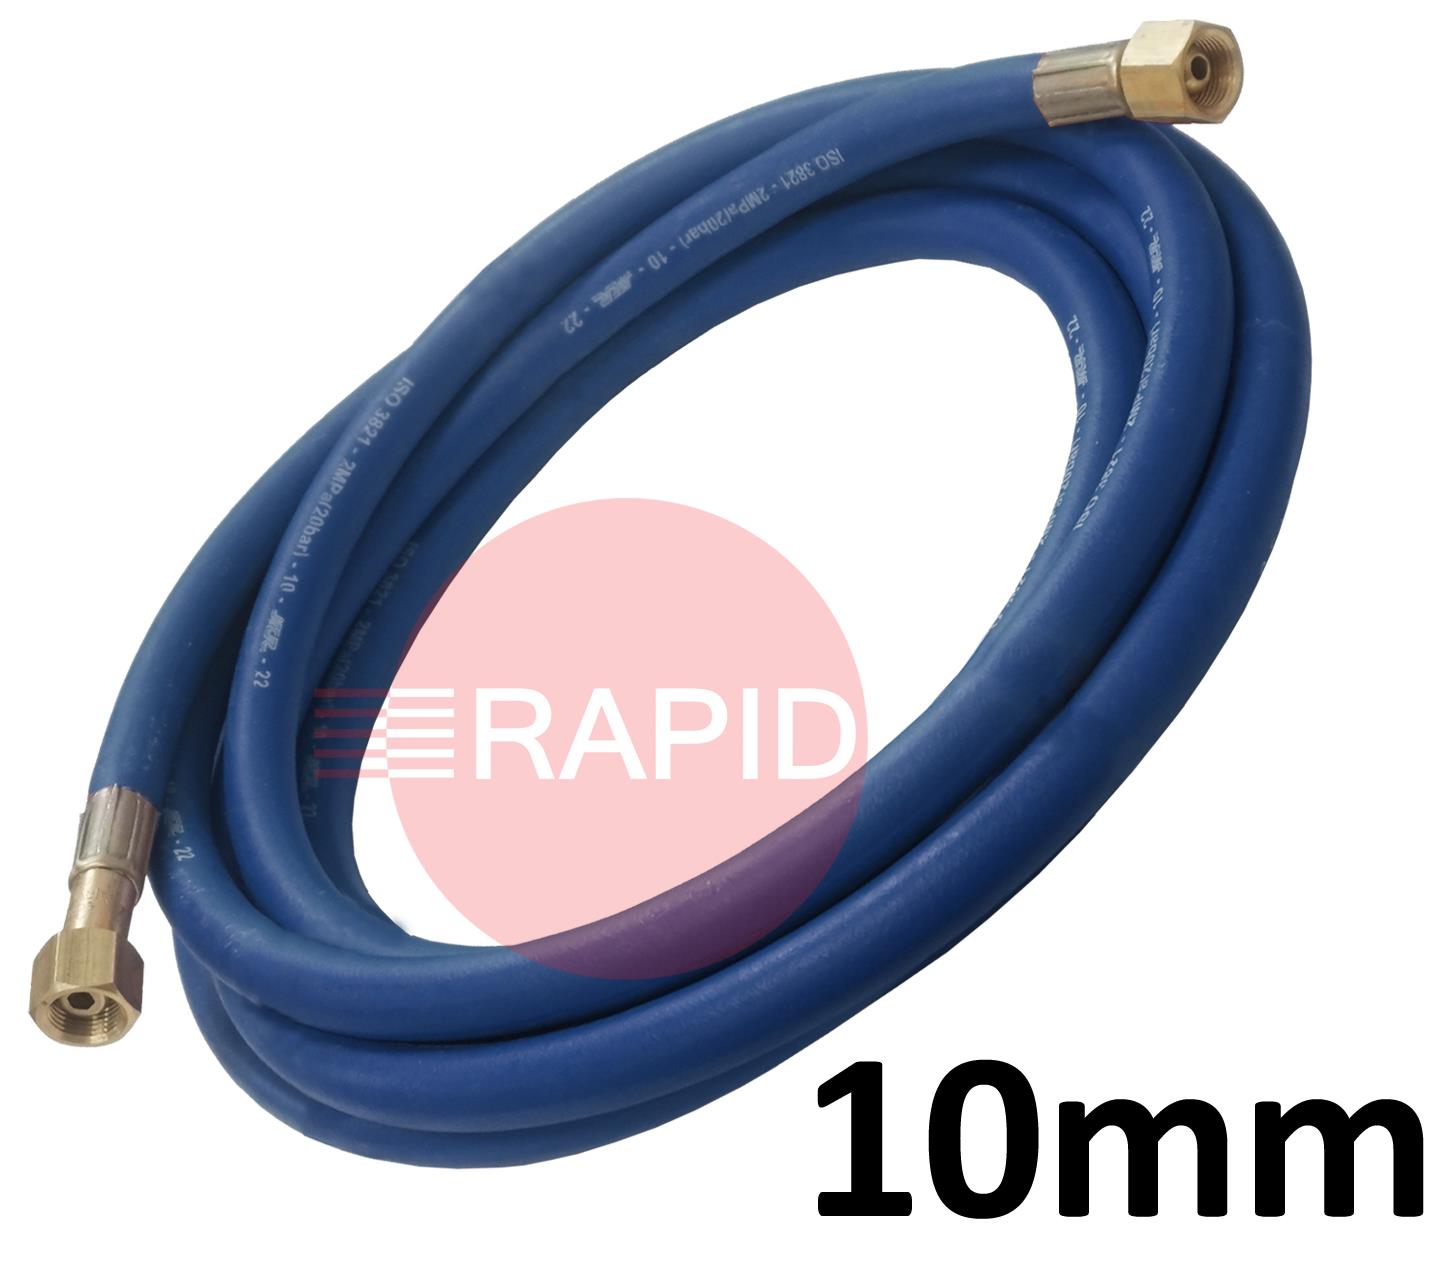 A5119  Fitted Oxygen Hose. 10mm Bore. G3/8 Check Valve & G3/8 Regulator Connection - 20m